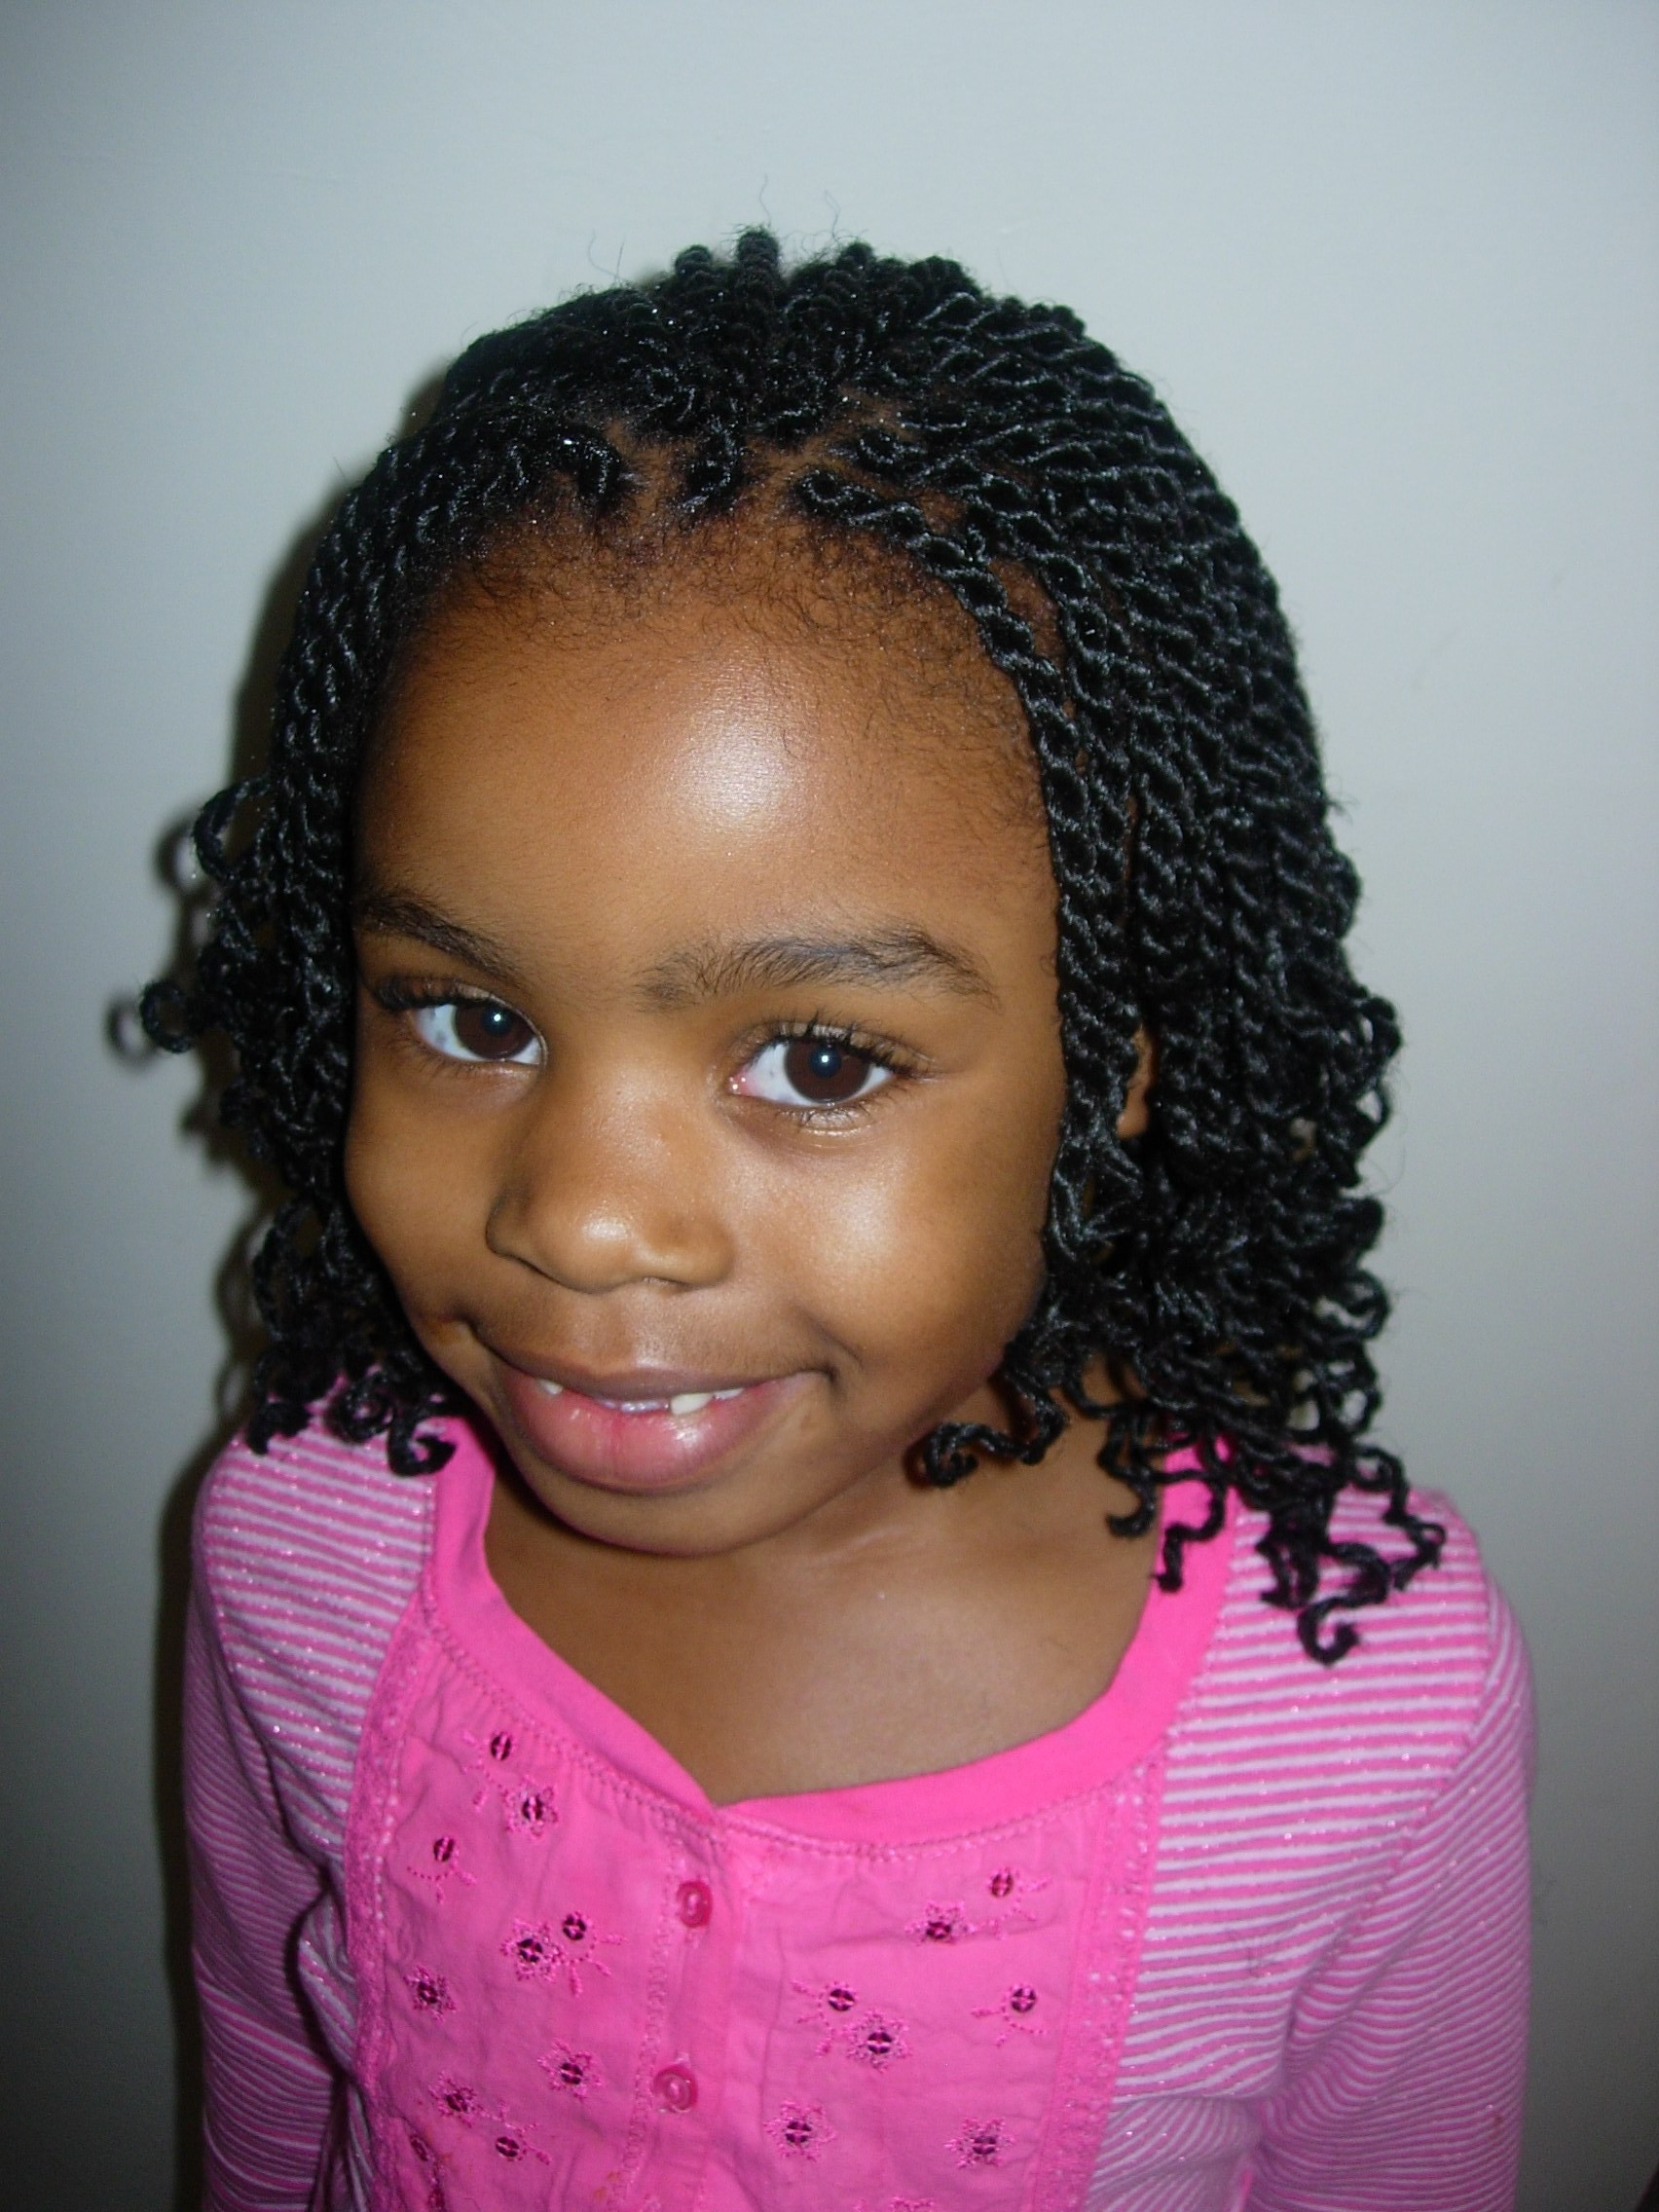 Little Black Girl Hairstyles Pictures
 9 Best Hairstyles for Black Little Girls